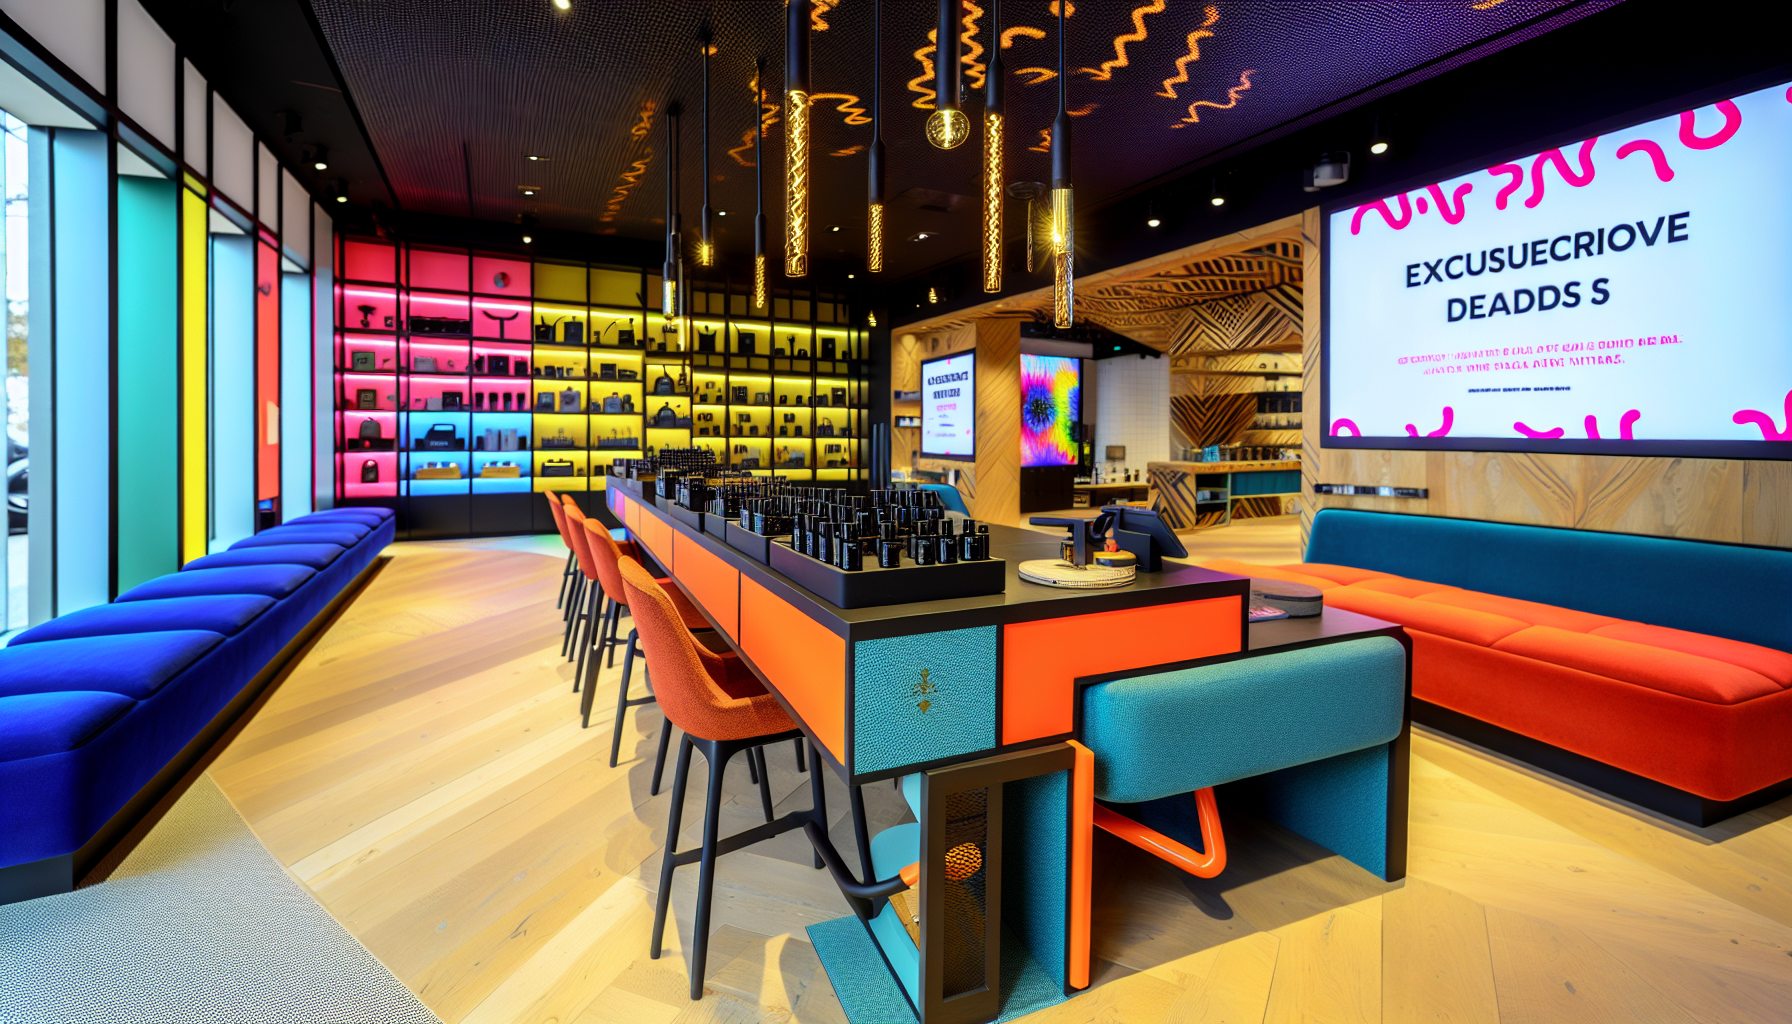 Trendy and stylish interior of a modern dispensary with exclusive deals and discounts